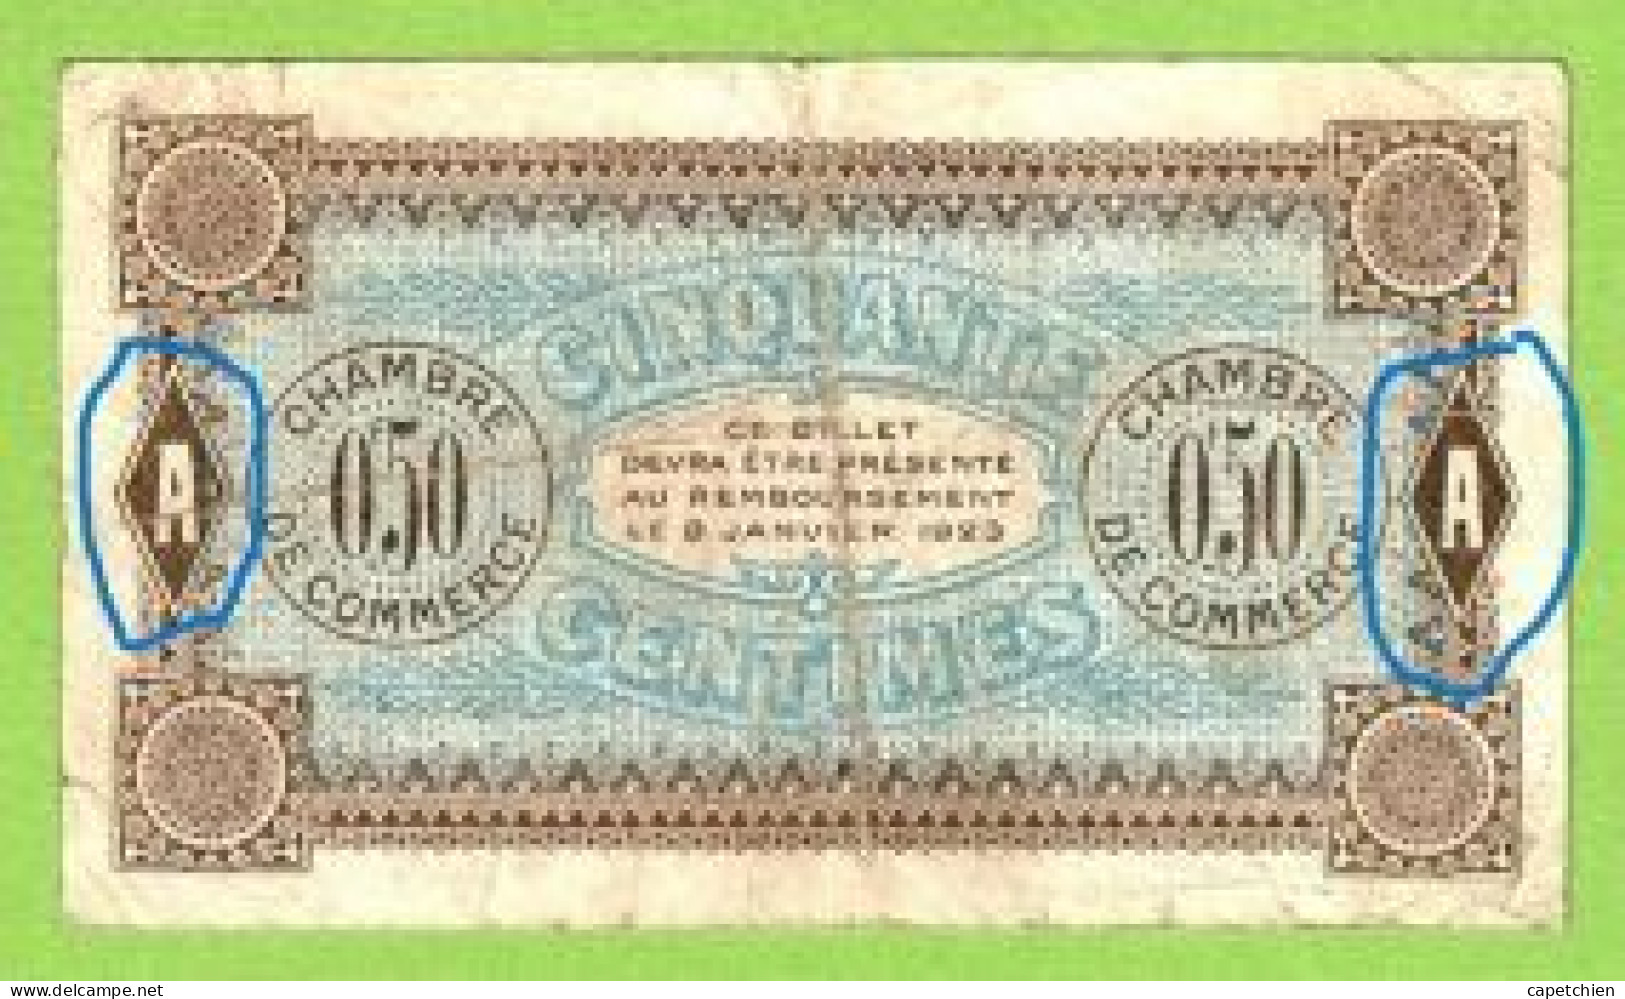 FRANCE / AUXERRE / 50 CENTIMES / 8 Janvier 1920 / N° 018559 / SERIE  I  109 - Chamber Of Commerce